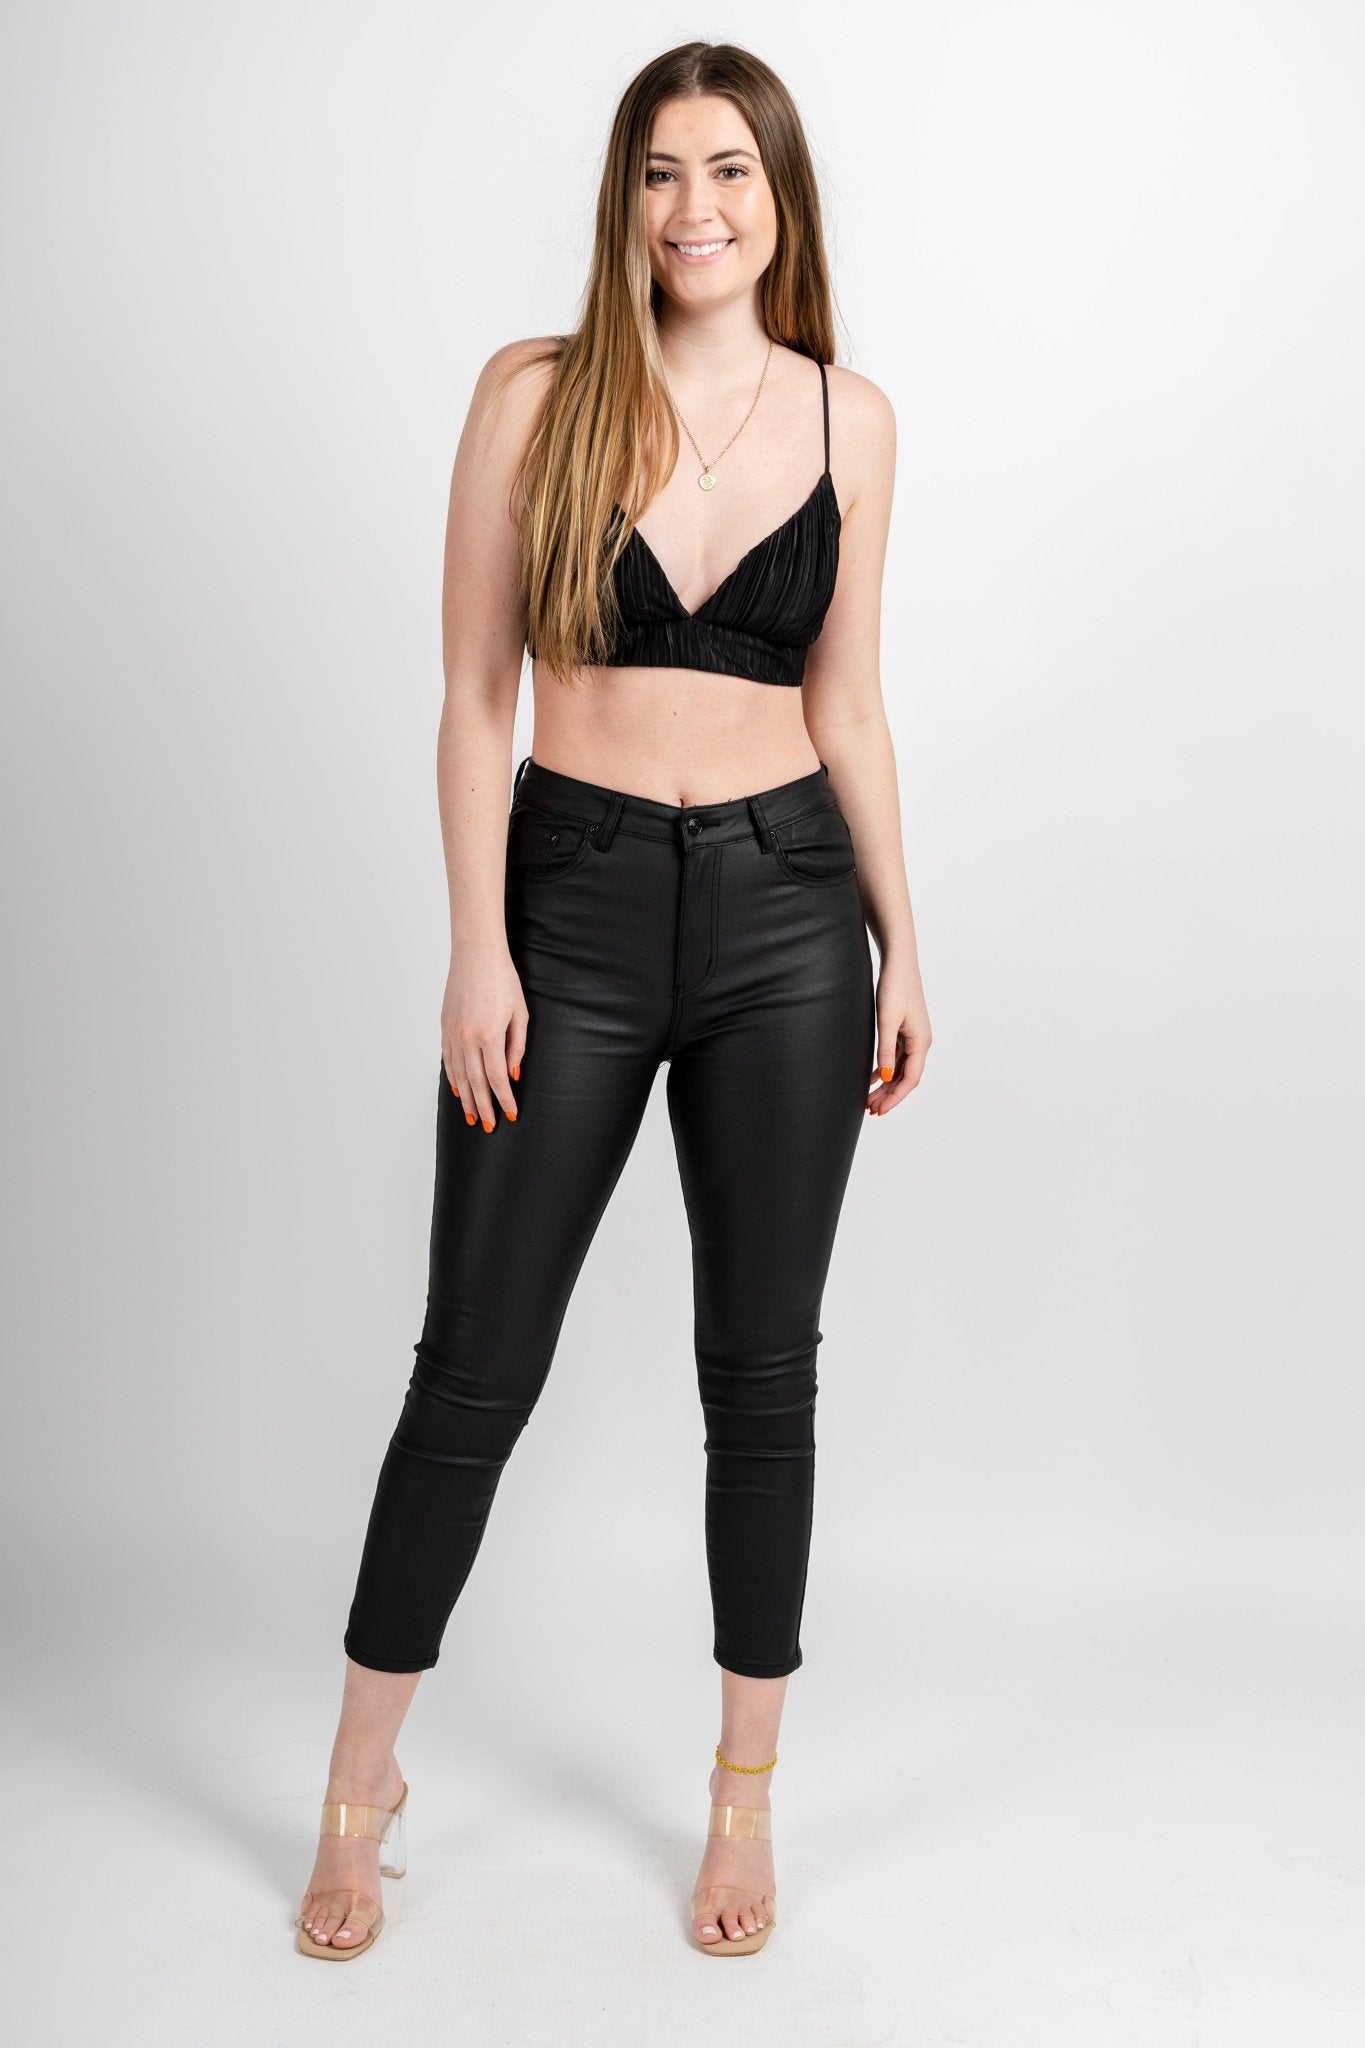 Pleated bralette top black - Trendy Top - Fashion Bras and Bralettes at Lush Fashion Lounge Boutique in Oklahoma City